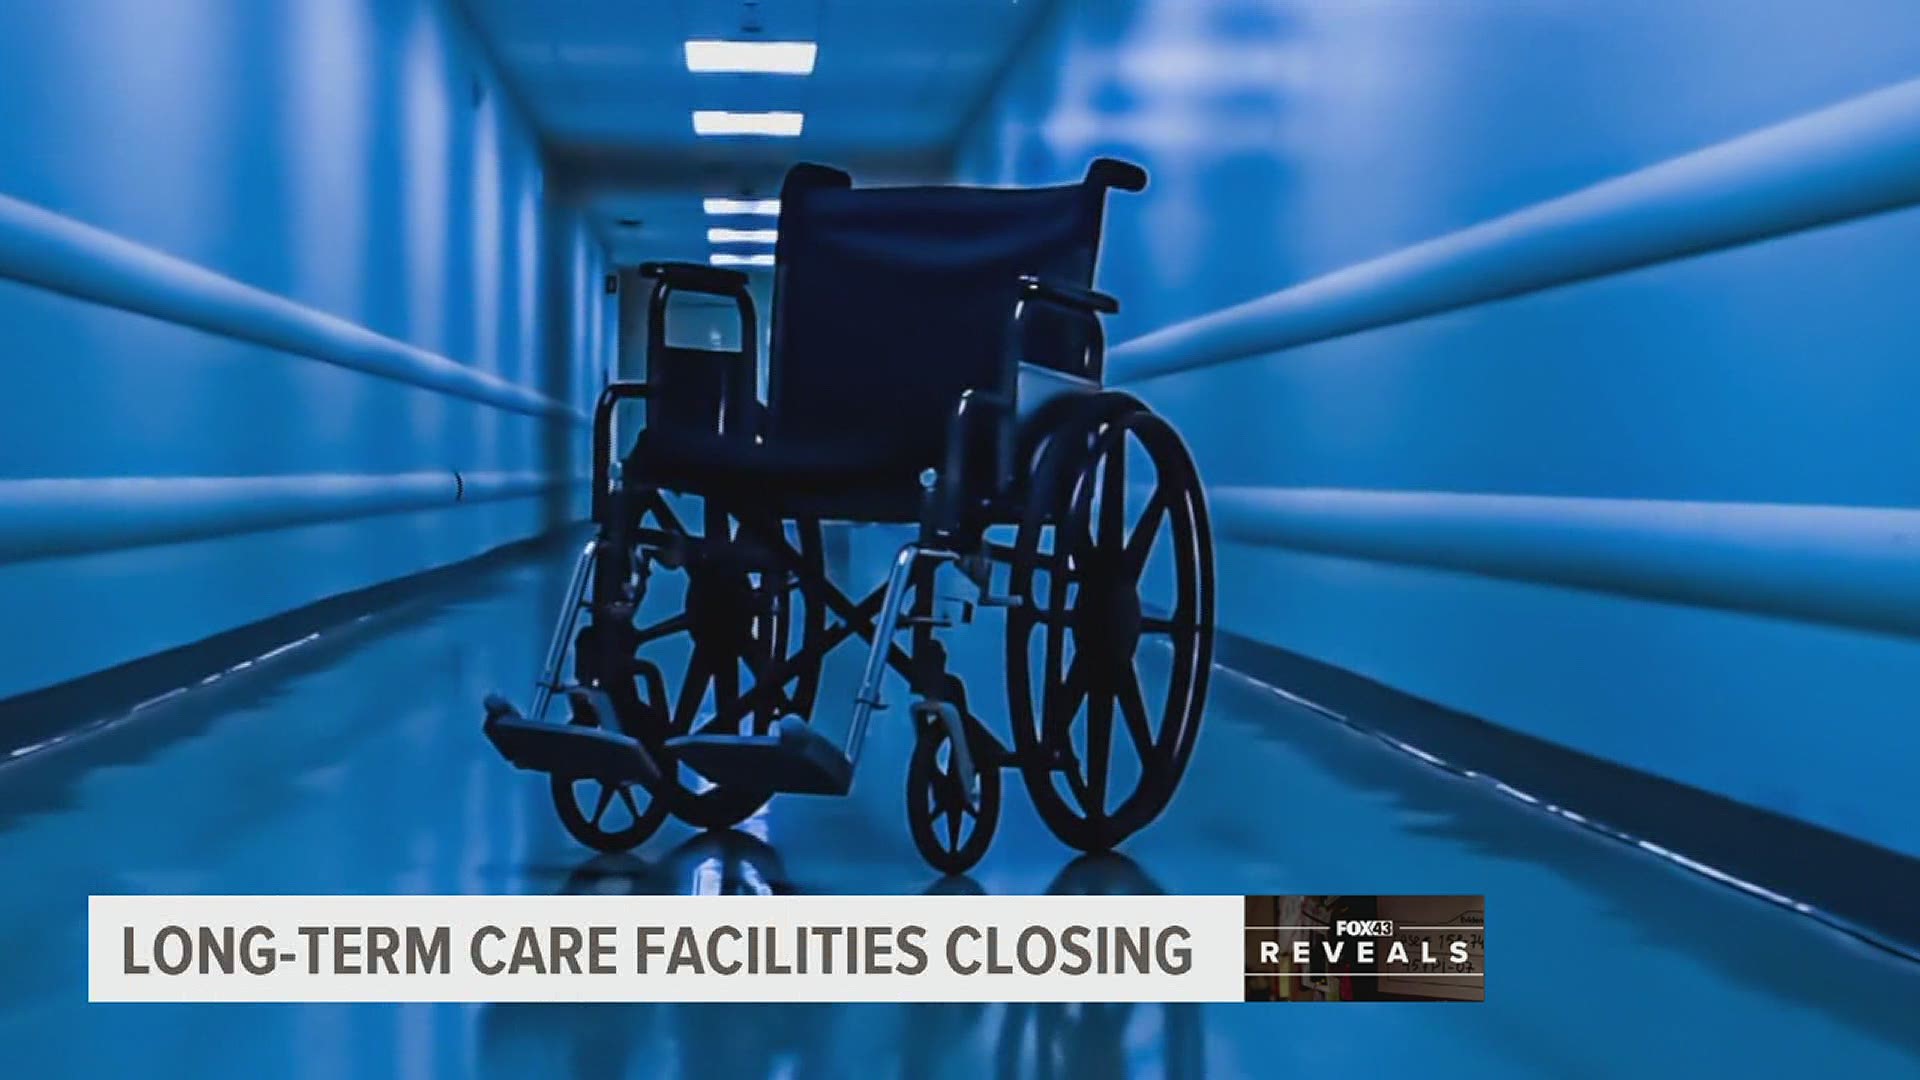 In the middle of a global pandemic, nursing homes and other long-term care facilities are facing another crisis: They are running out of money.